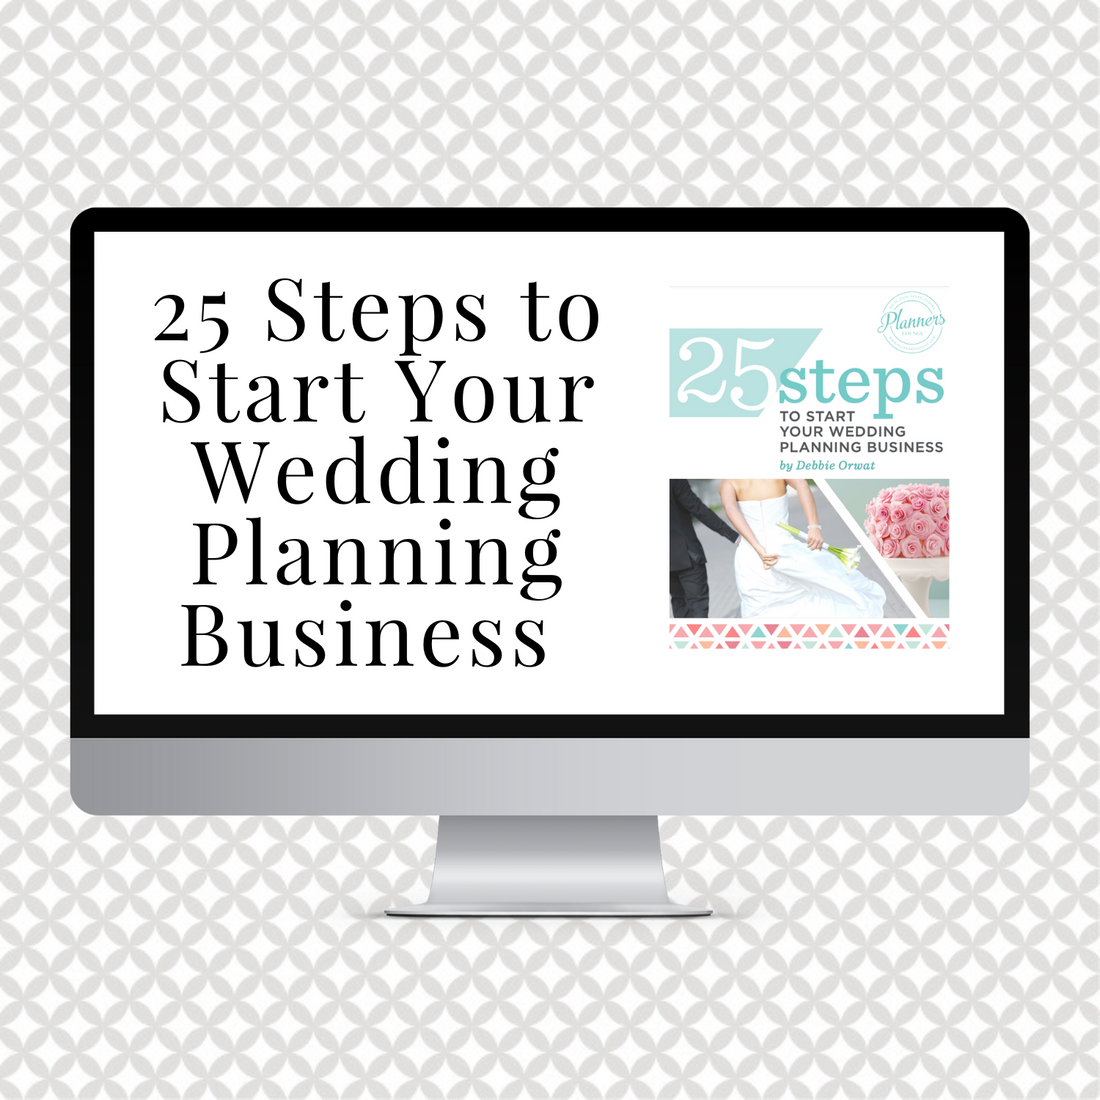 25 Steps to Start Your Wedding Planning Business